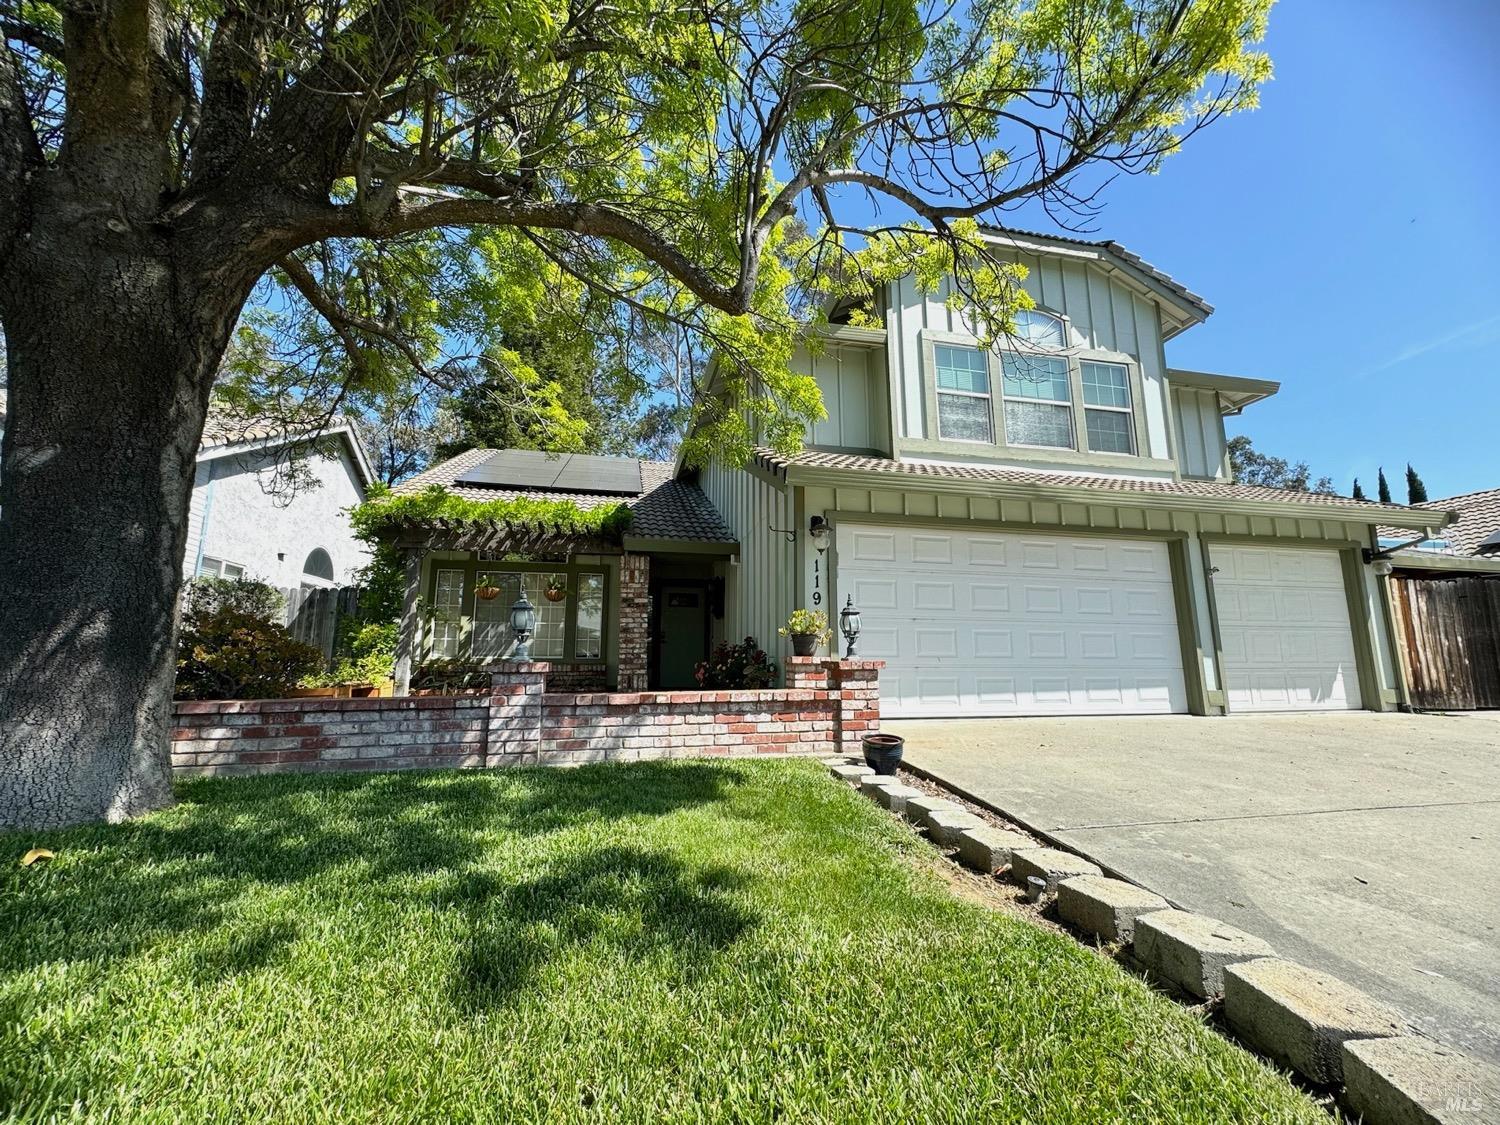 Photo of 119 Lighthouse Wy in Vacaville, CA